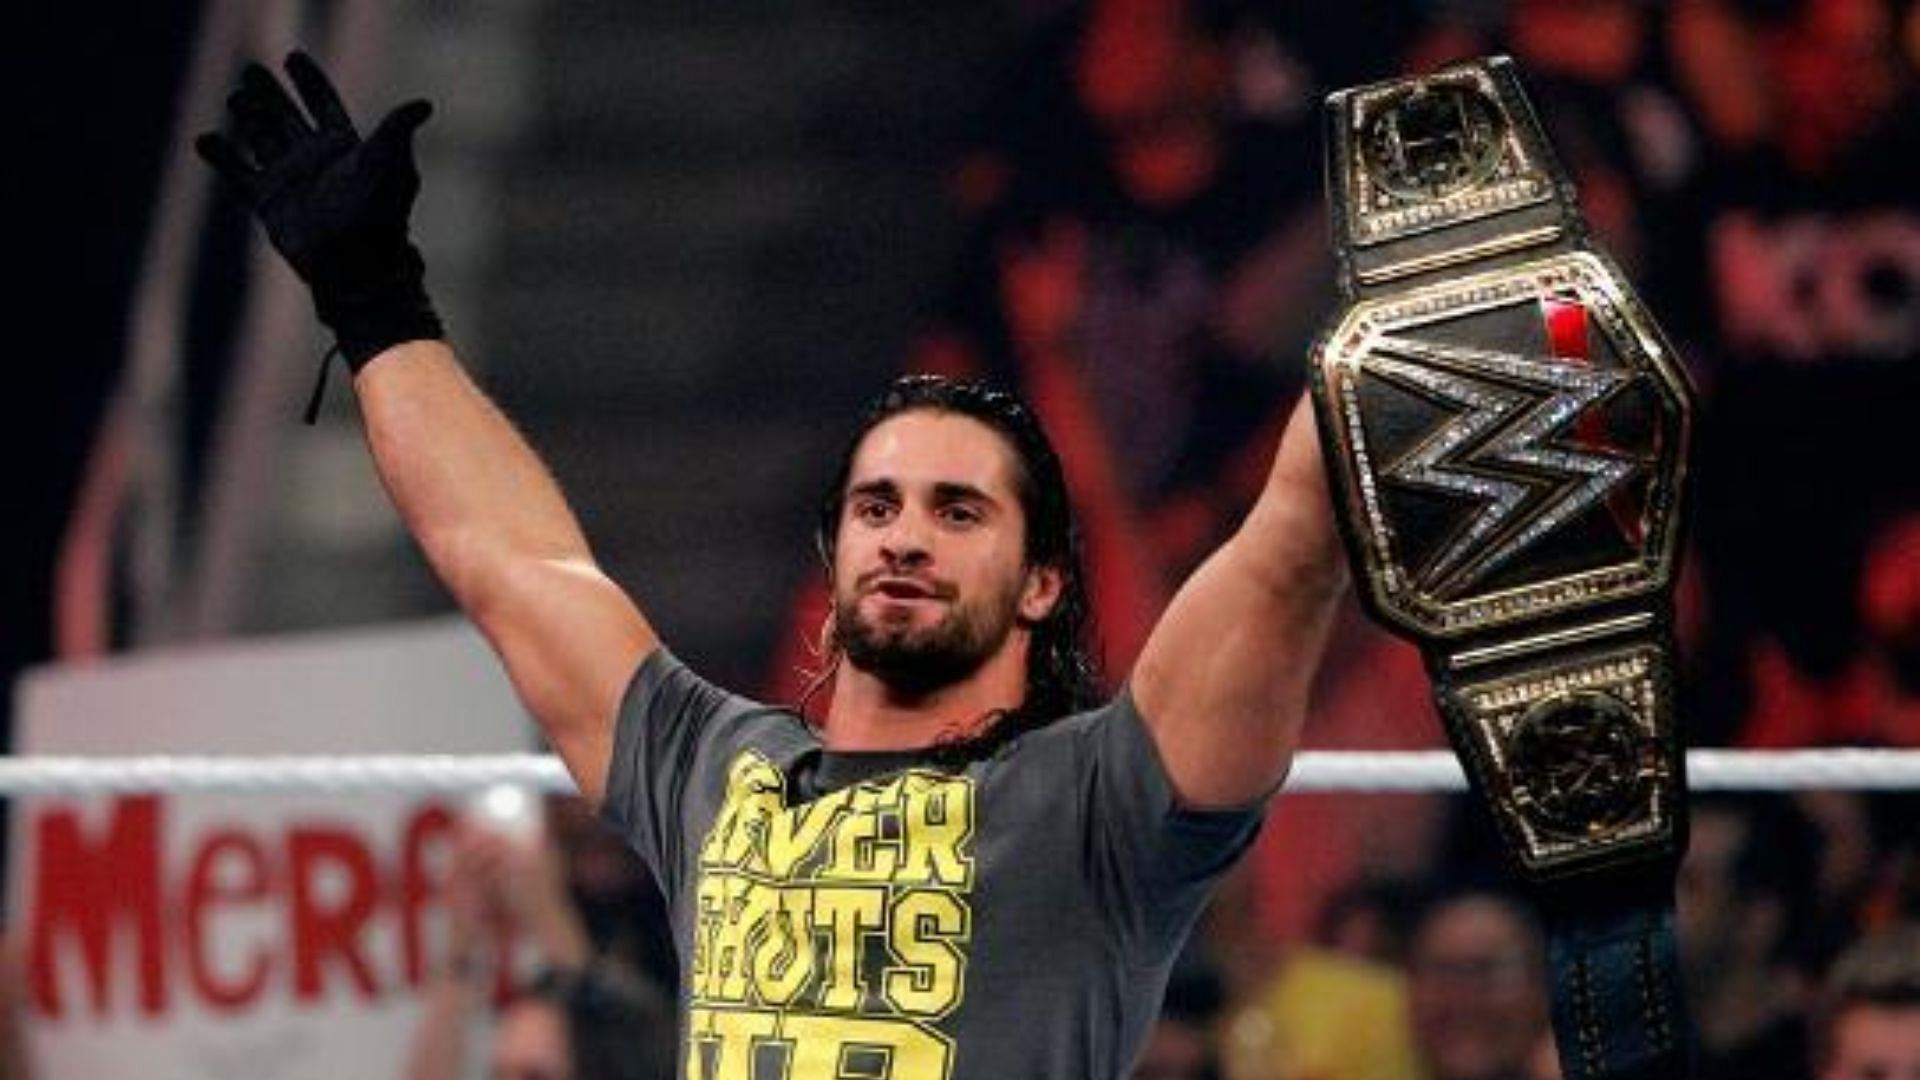 Seth Rollins last held the WWE Championship in 2016